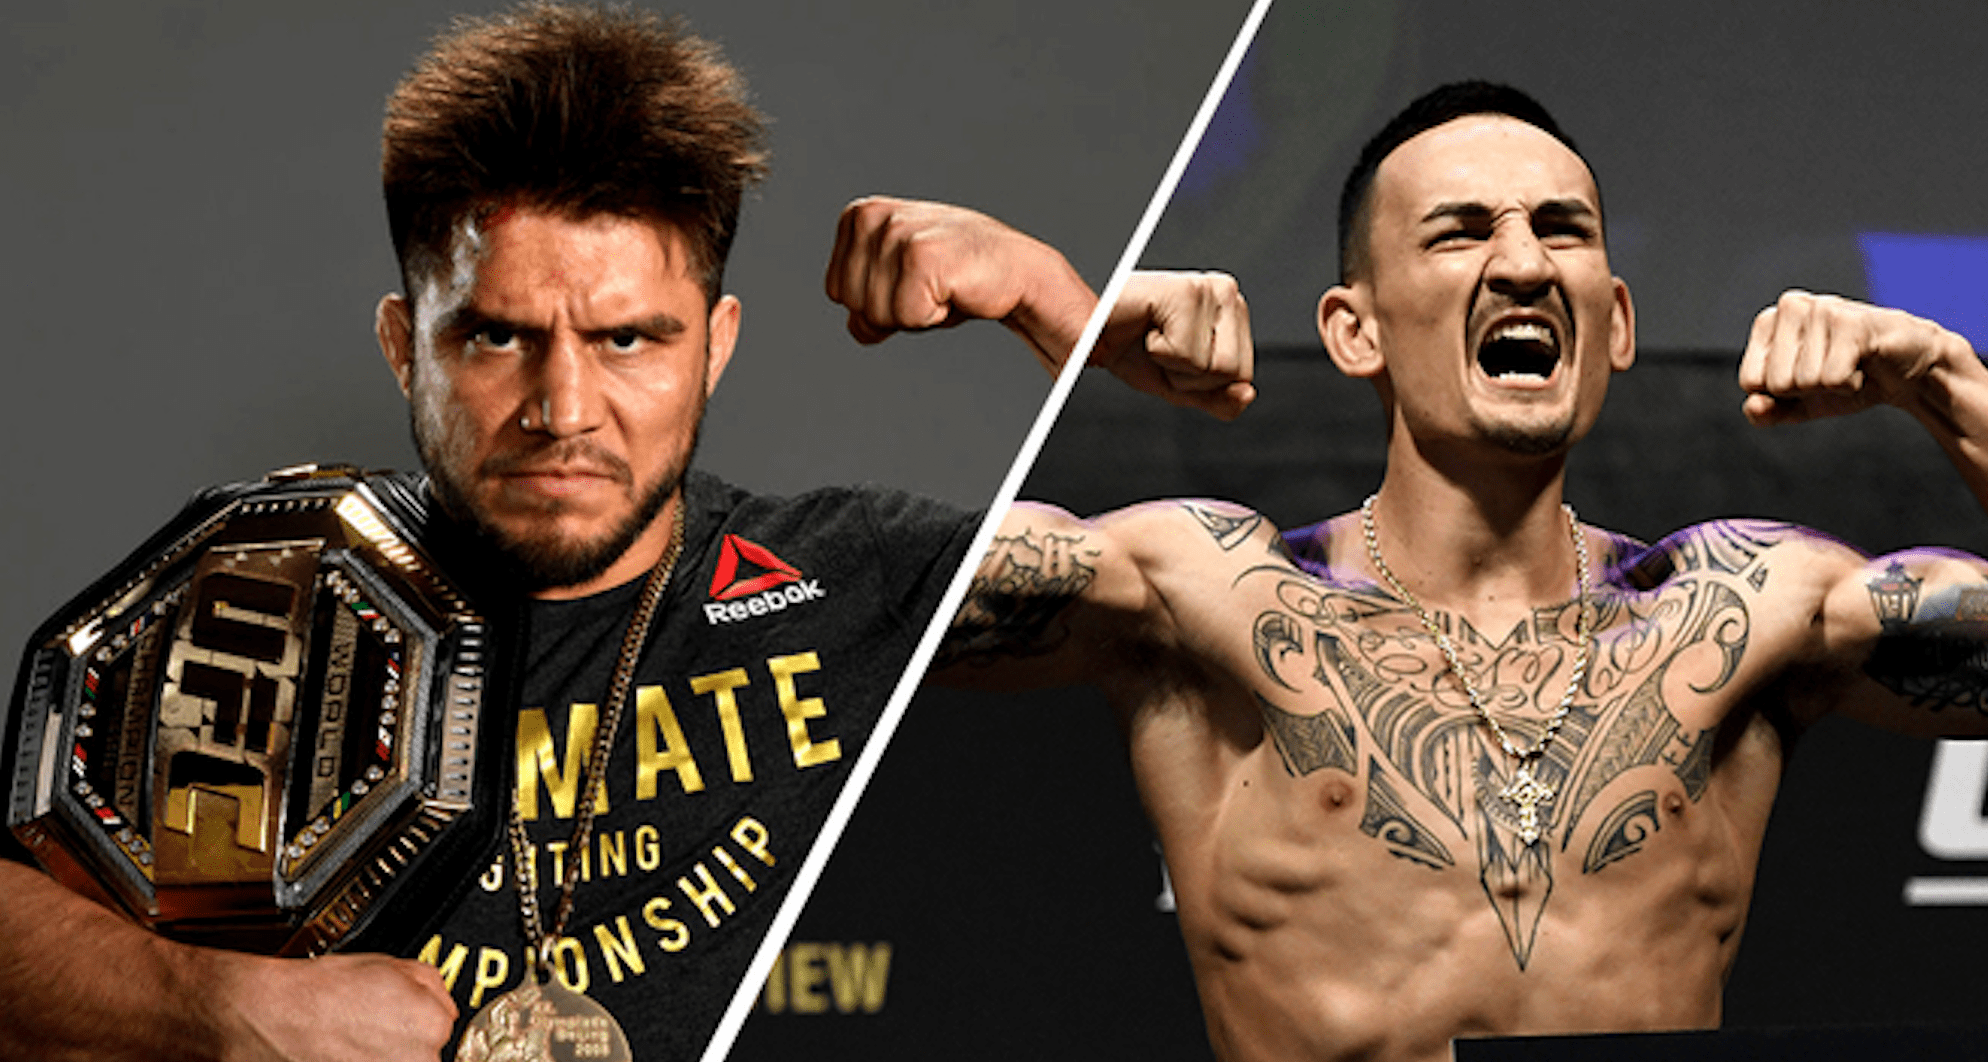 Henry Cejudo calls out Max Holloway for a fight